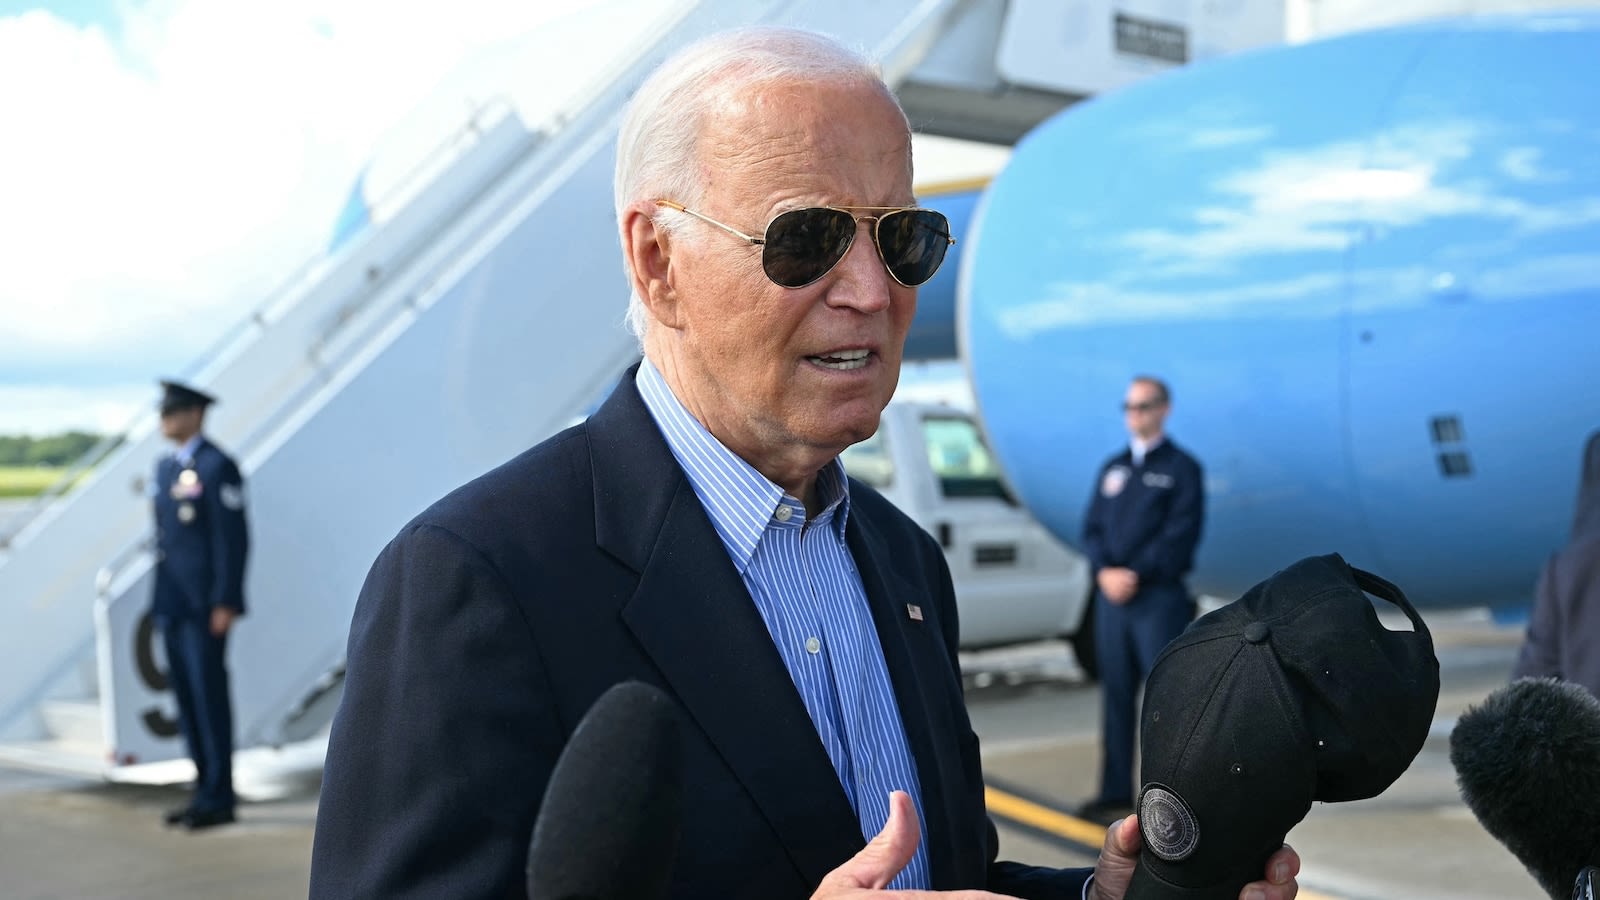 Major Democratic donors continue calls for Biden to step aside after ABC News interview